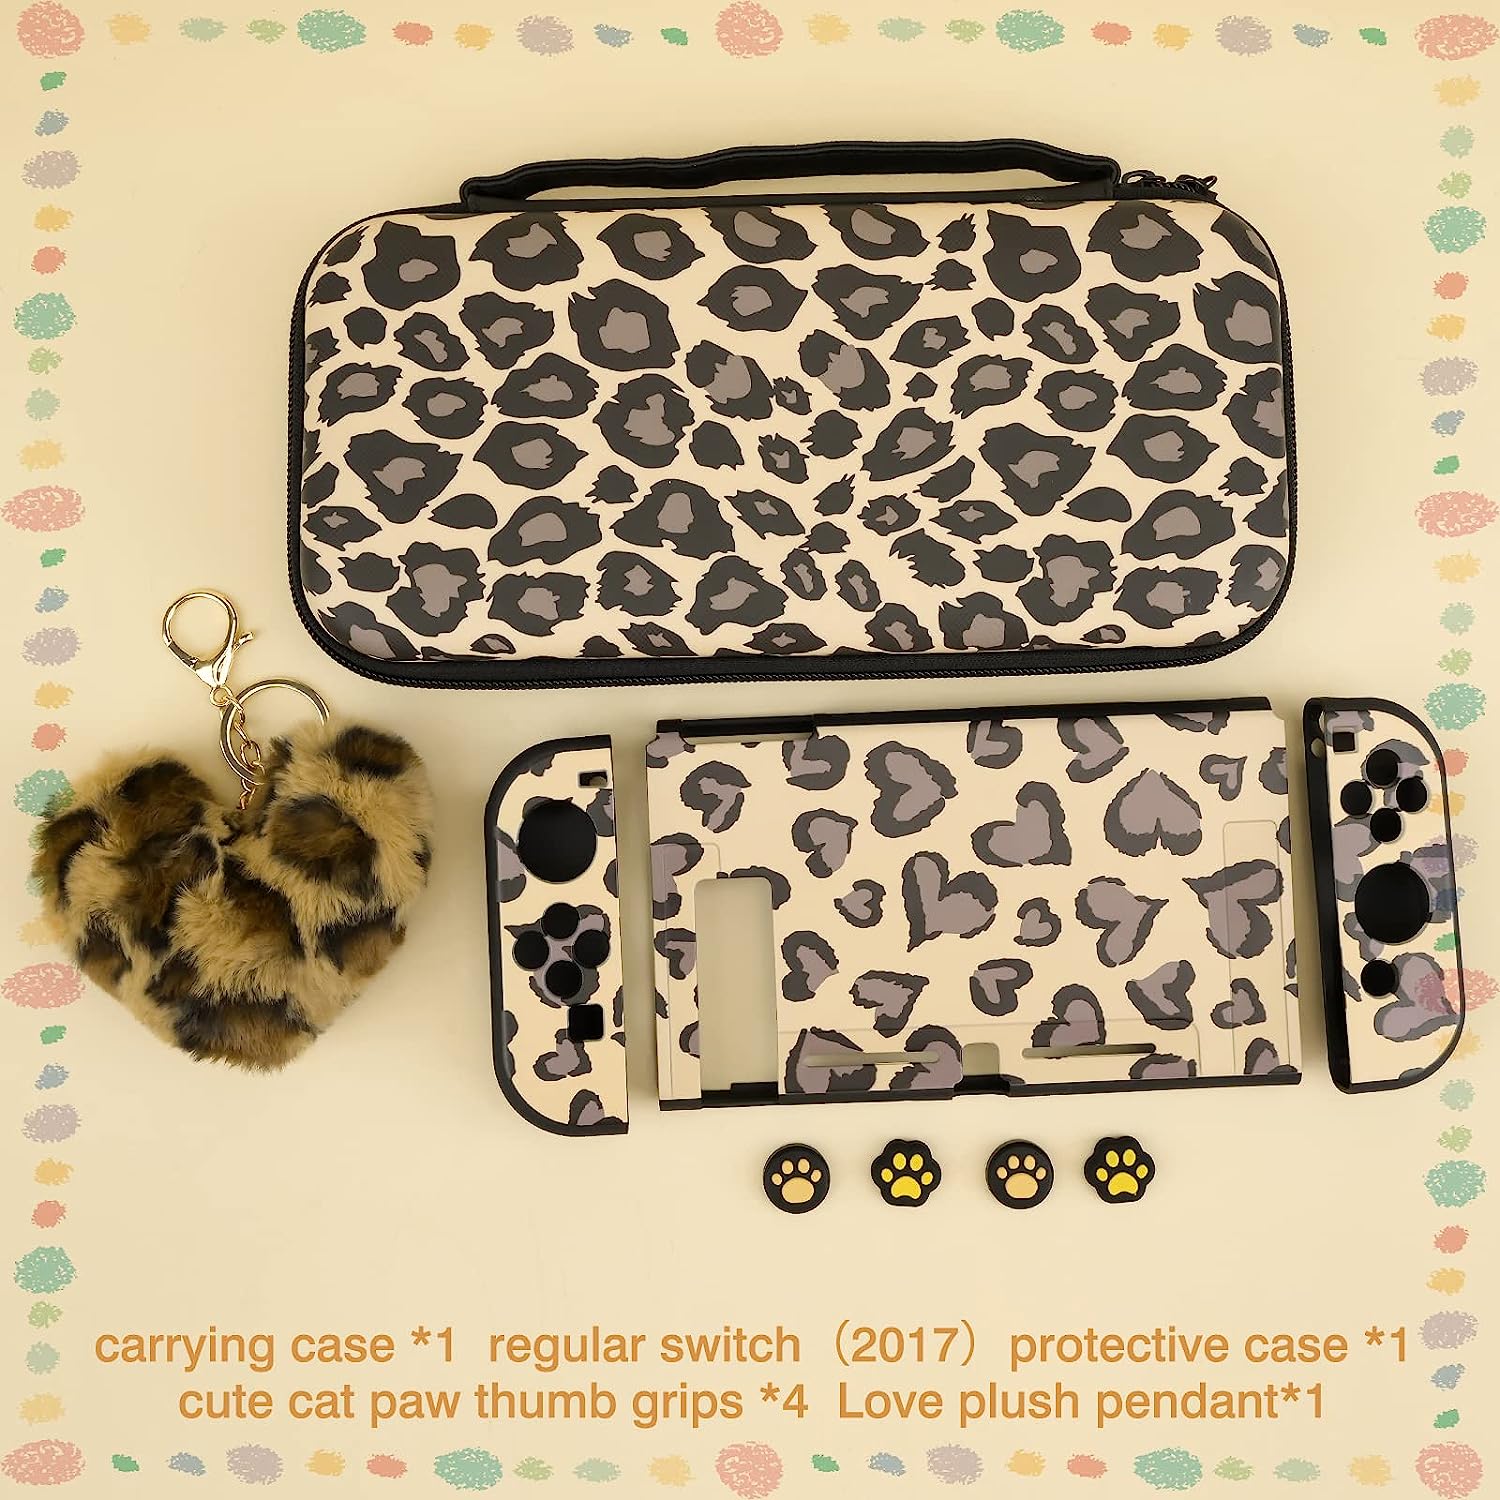 DLseego Brown Love Leopard Carrying Case for Switch, Cute Silicone Protective Case Soft Cover with 4PCS Thumb Grip Caps සහ Brown Plush Heart Pendant Hard Storage Case Accessories Kit Bundle for Girls